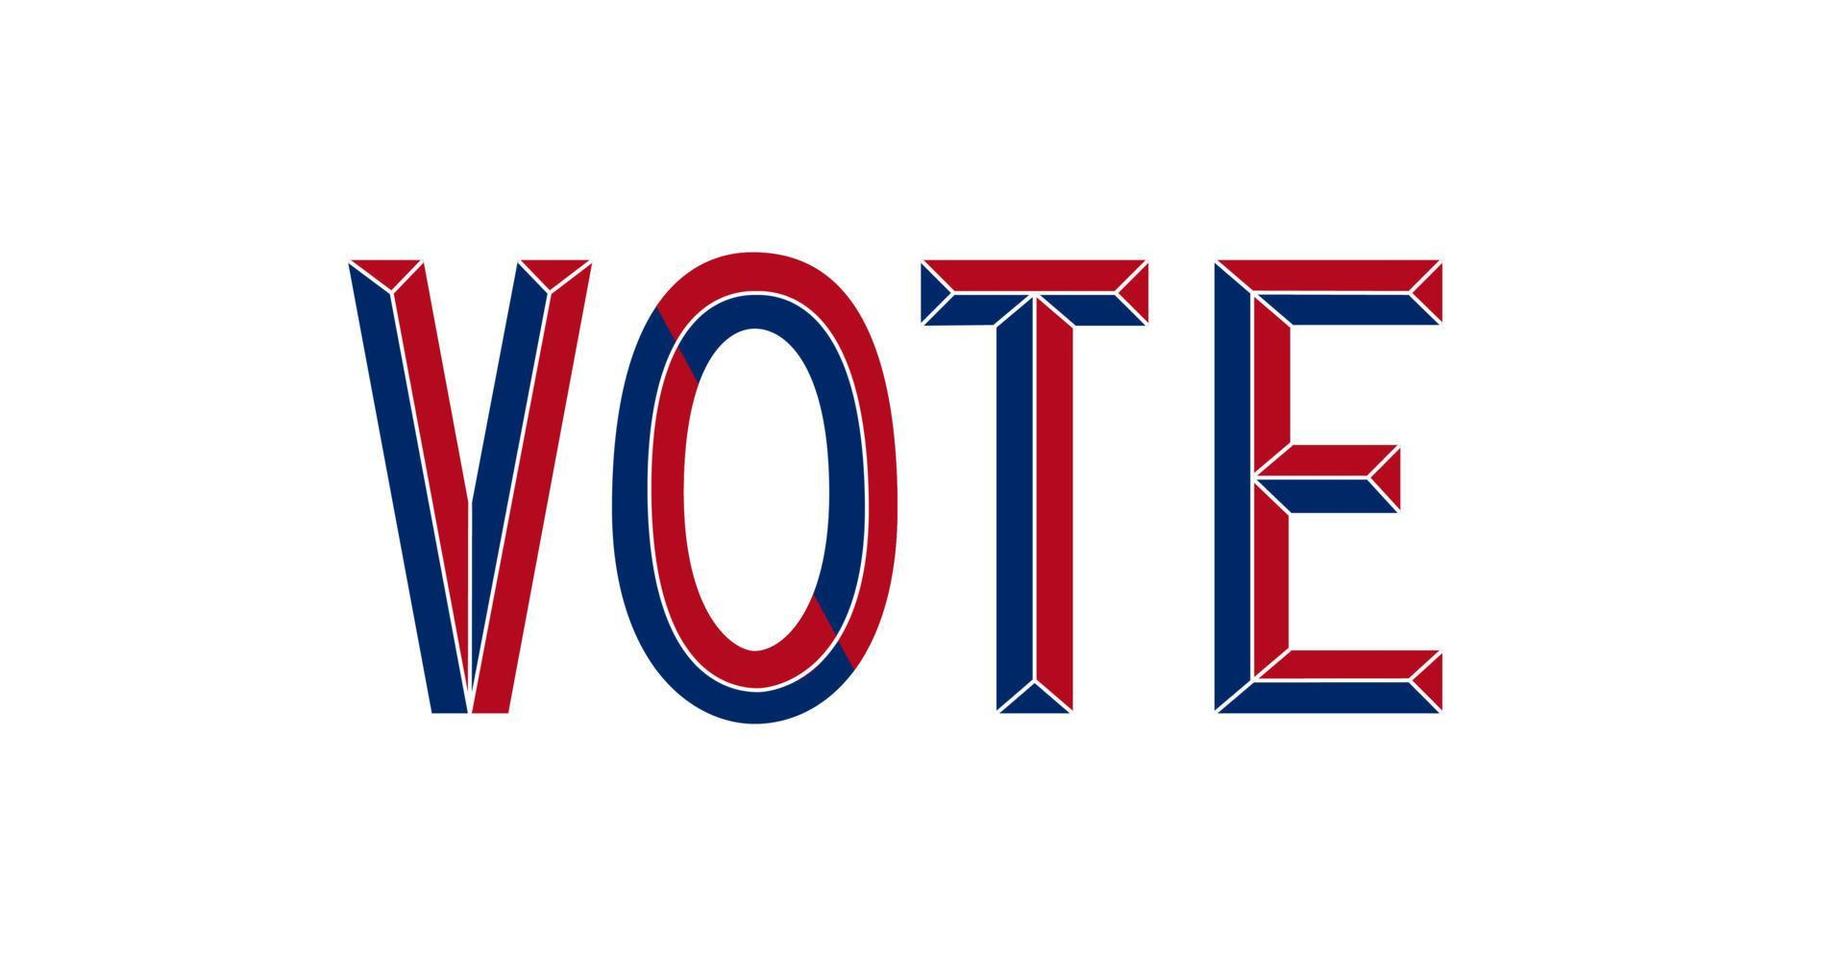 Vote text with embossed letters. Lettering poster for election 2020 to make a choice. Use for banner, sticker, print vector